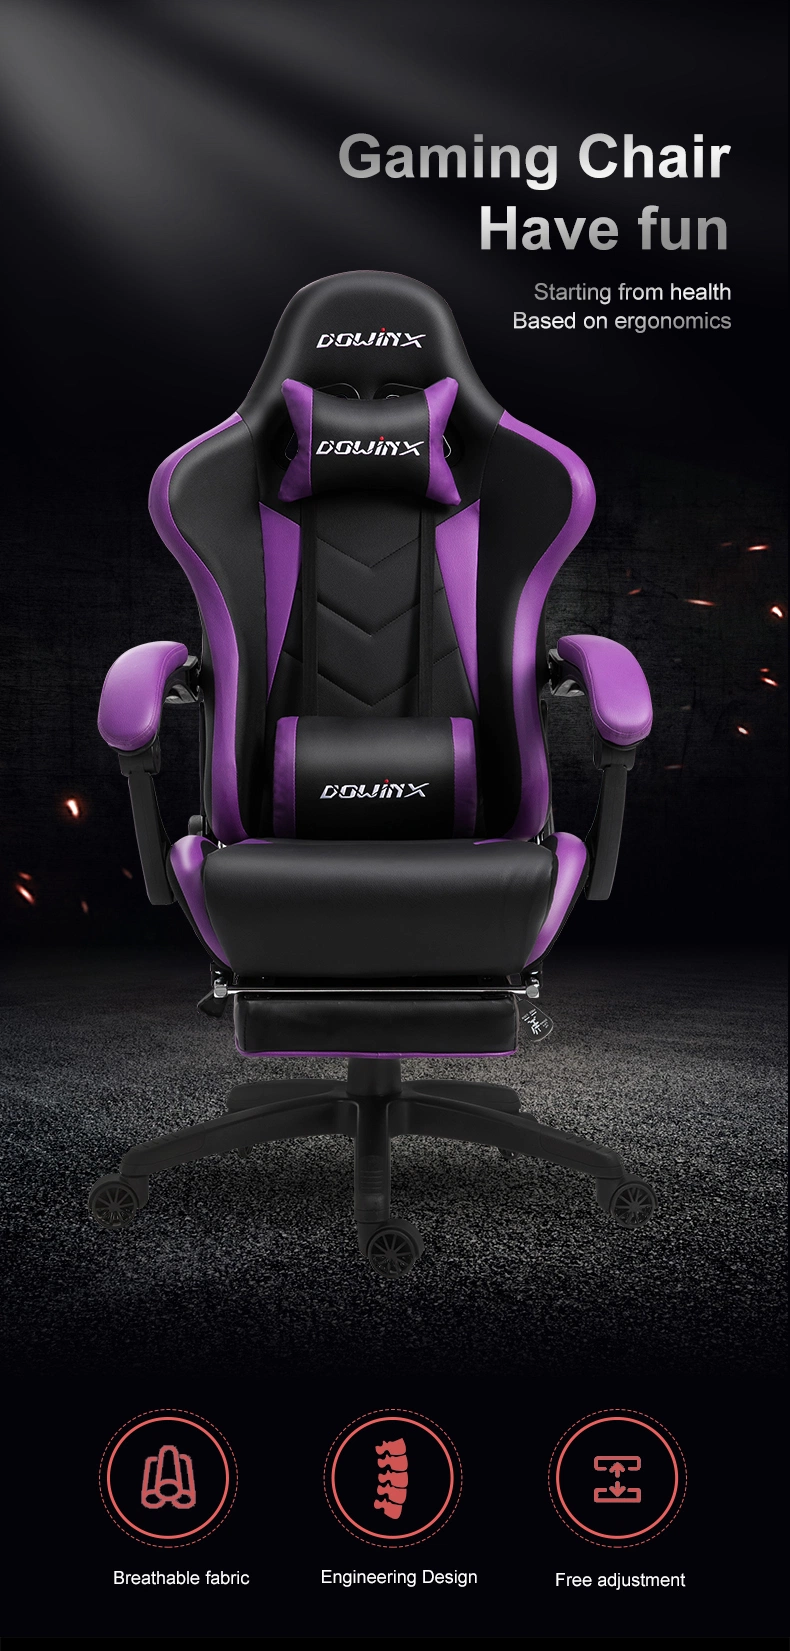 Best Price Gaming Ergonomic High Back Gaming Chair Wholesale Chair Manufacturers